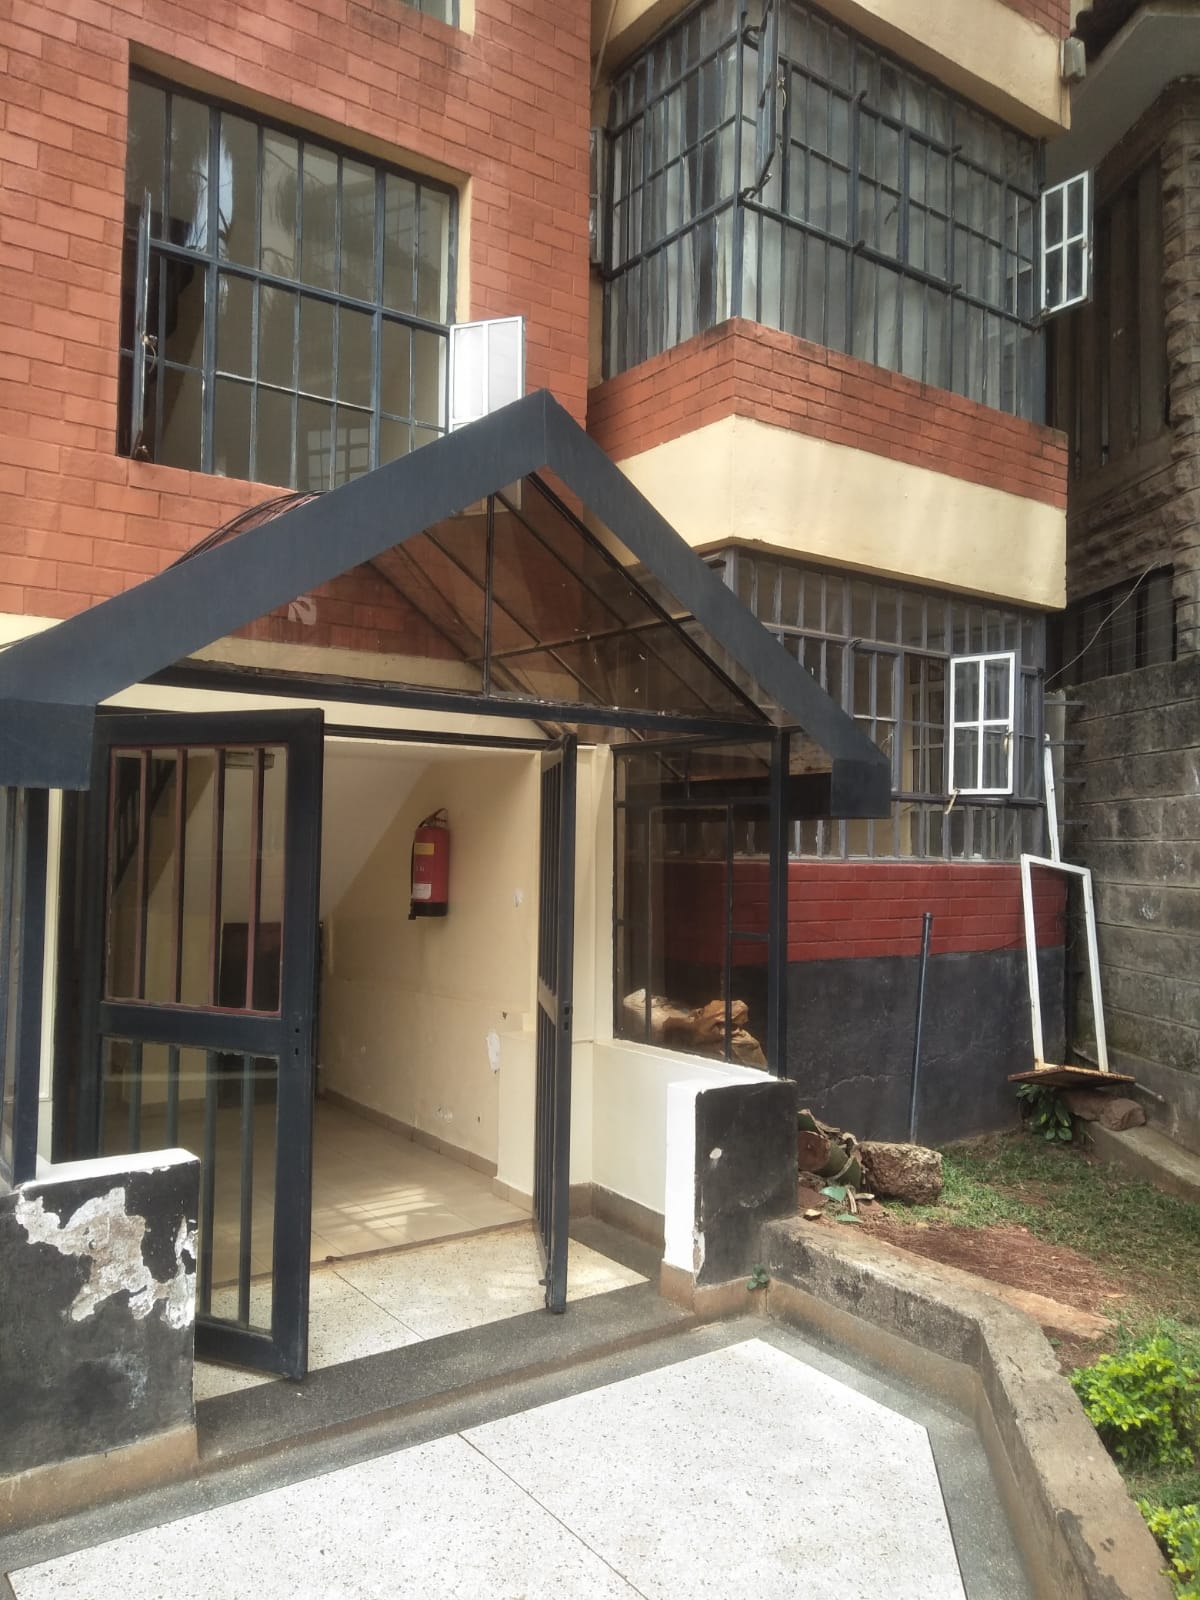 2 bedroom for Rent 60,000/- pm in Lavington